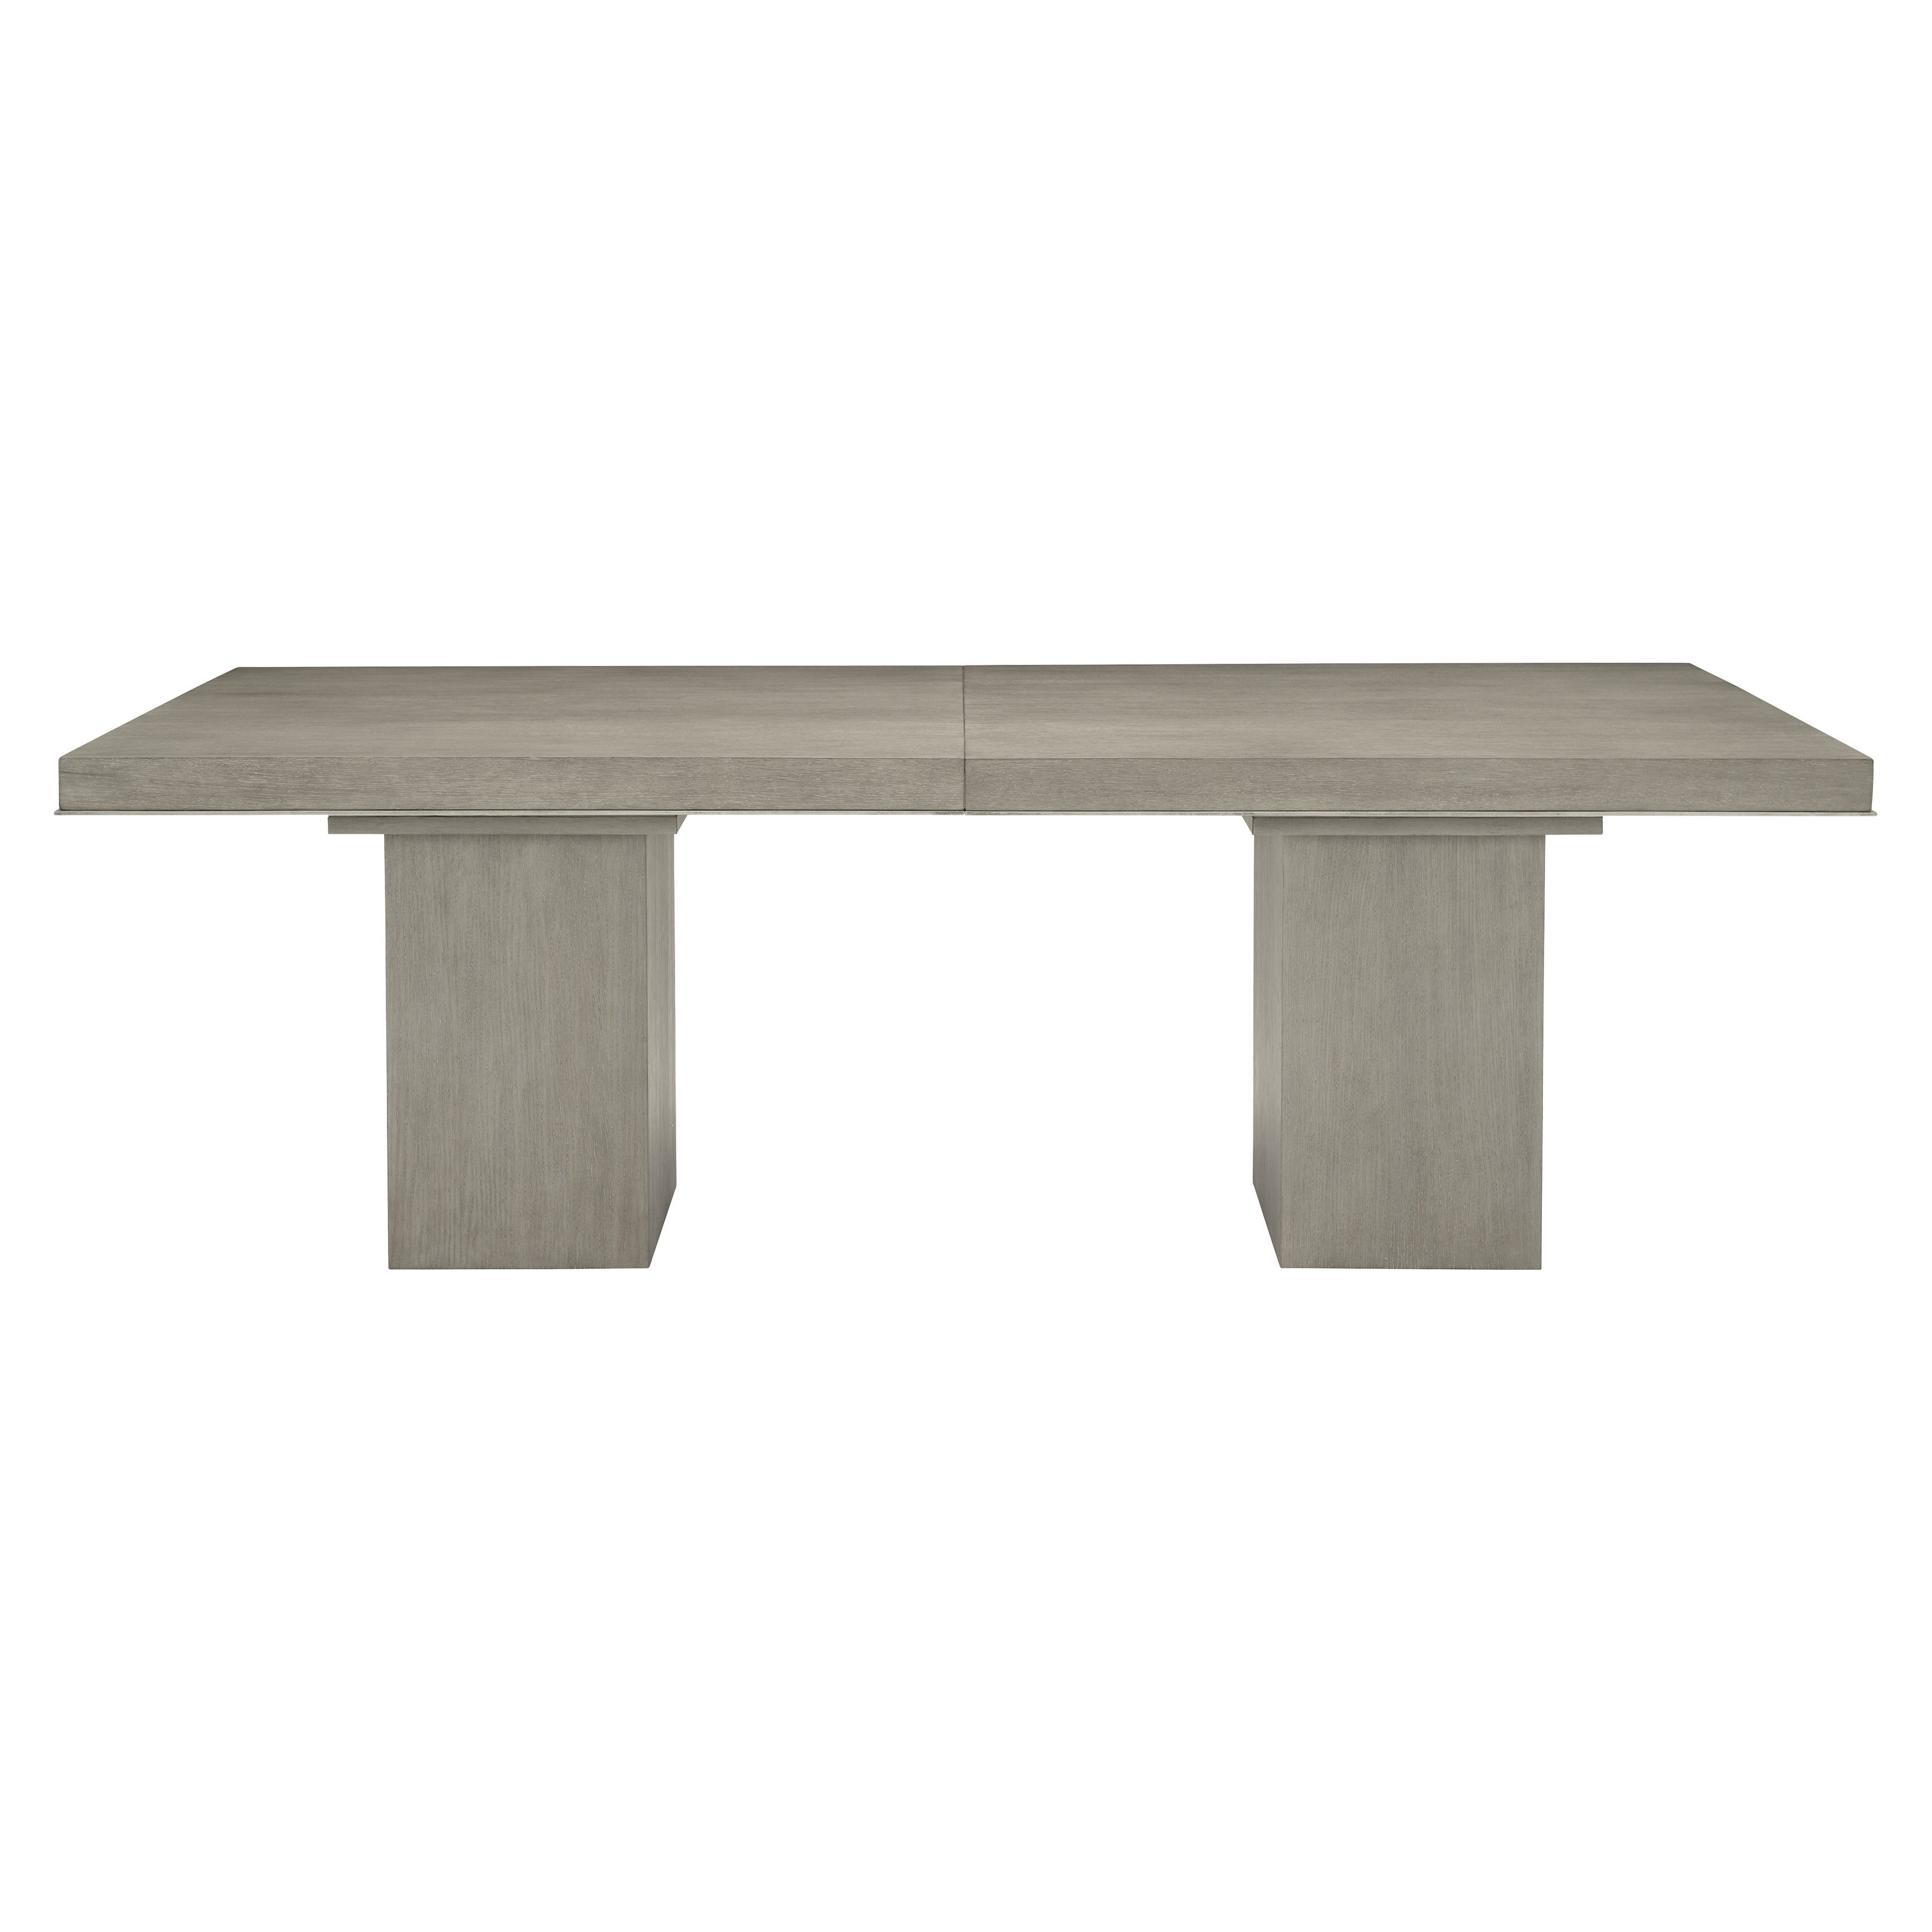 Linea Rectangular Dining Table in Cerused Greige